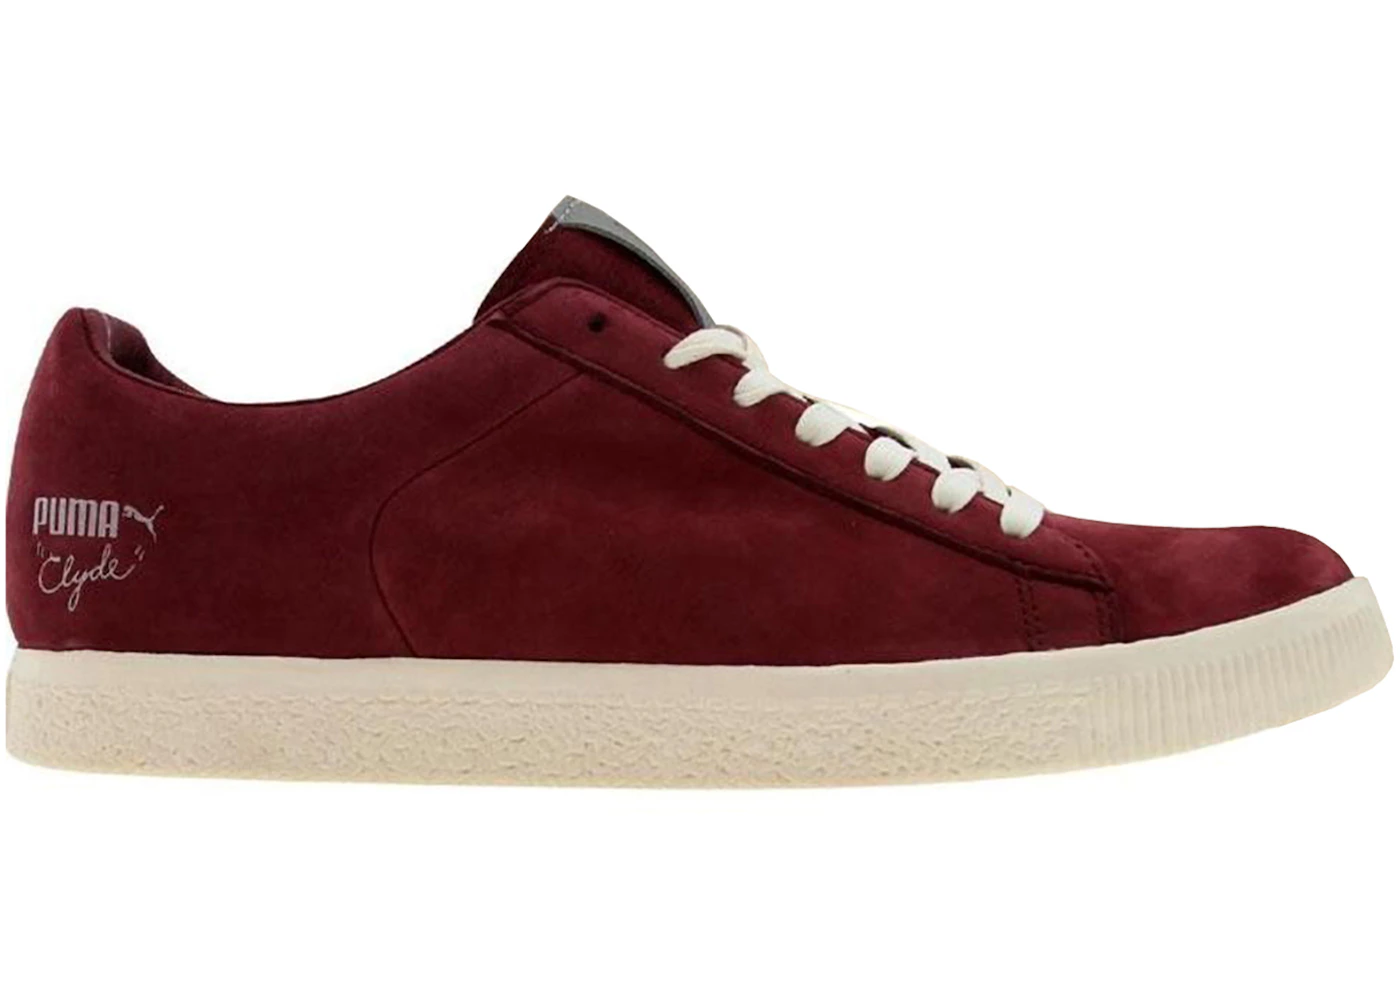 Puma Clyde Luxe 2 Undefeated Team Burgundy Men's - 354265-01 - US